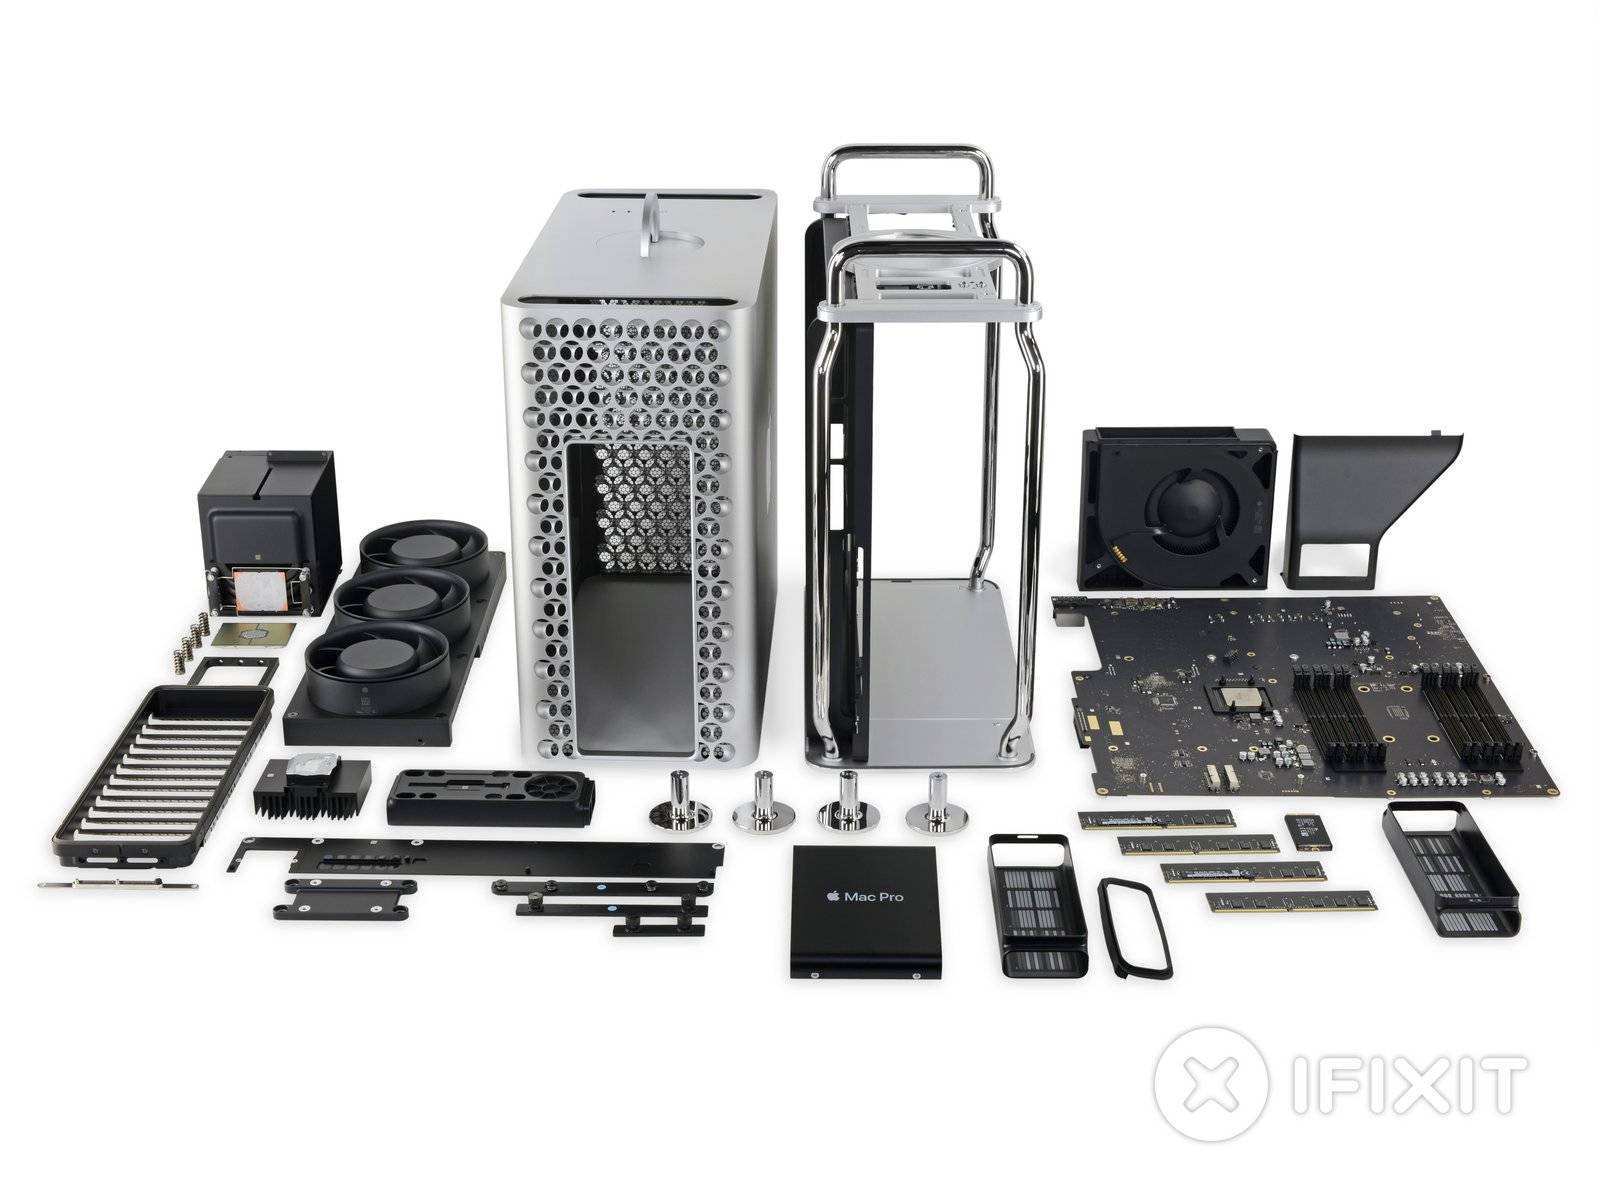 How will the new Apple Mac Pro do in the iFixit teardown